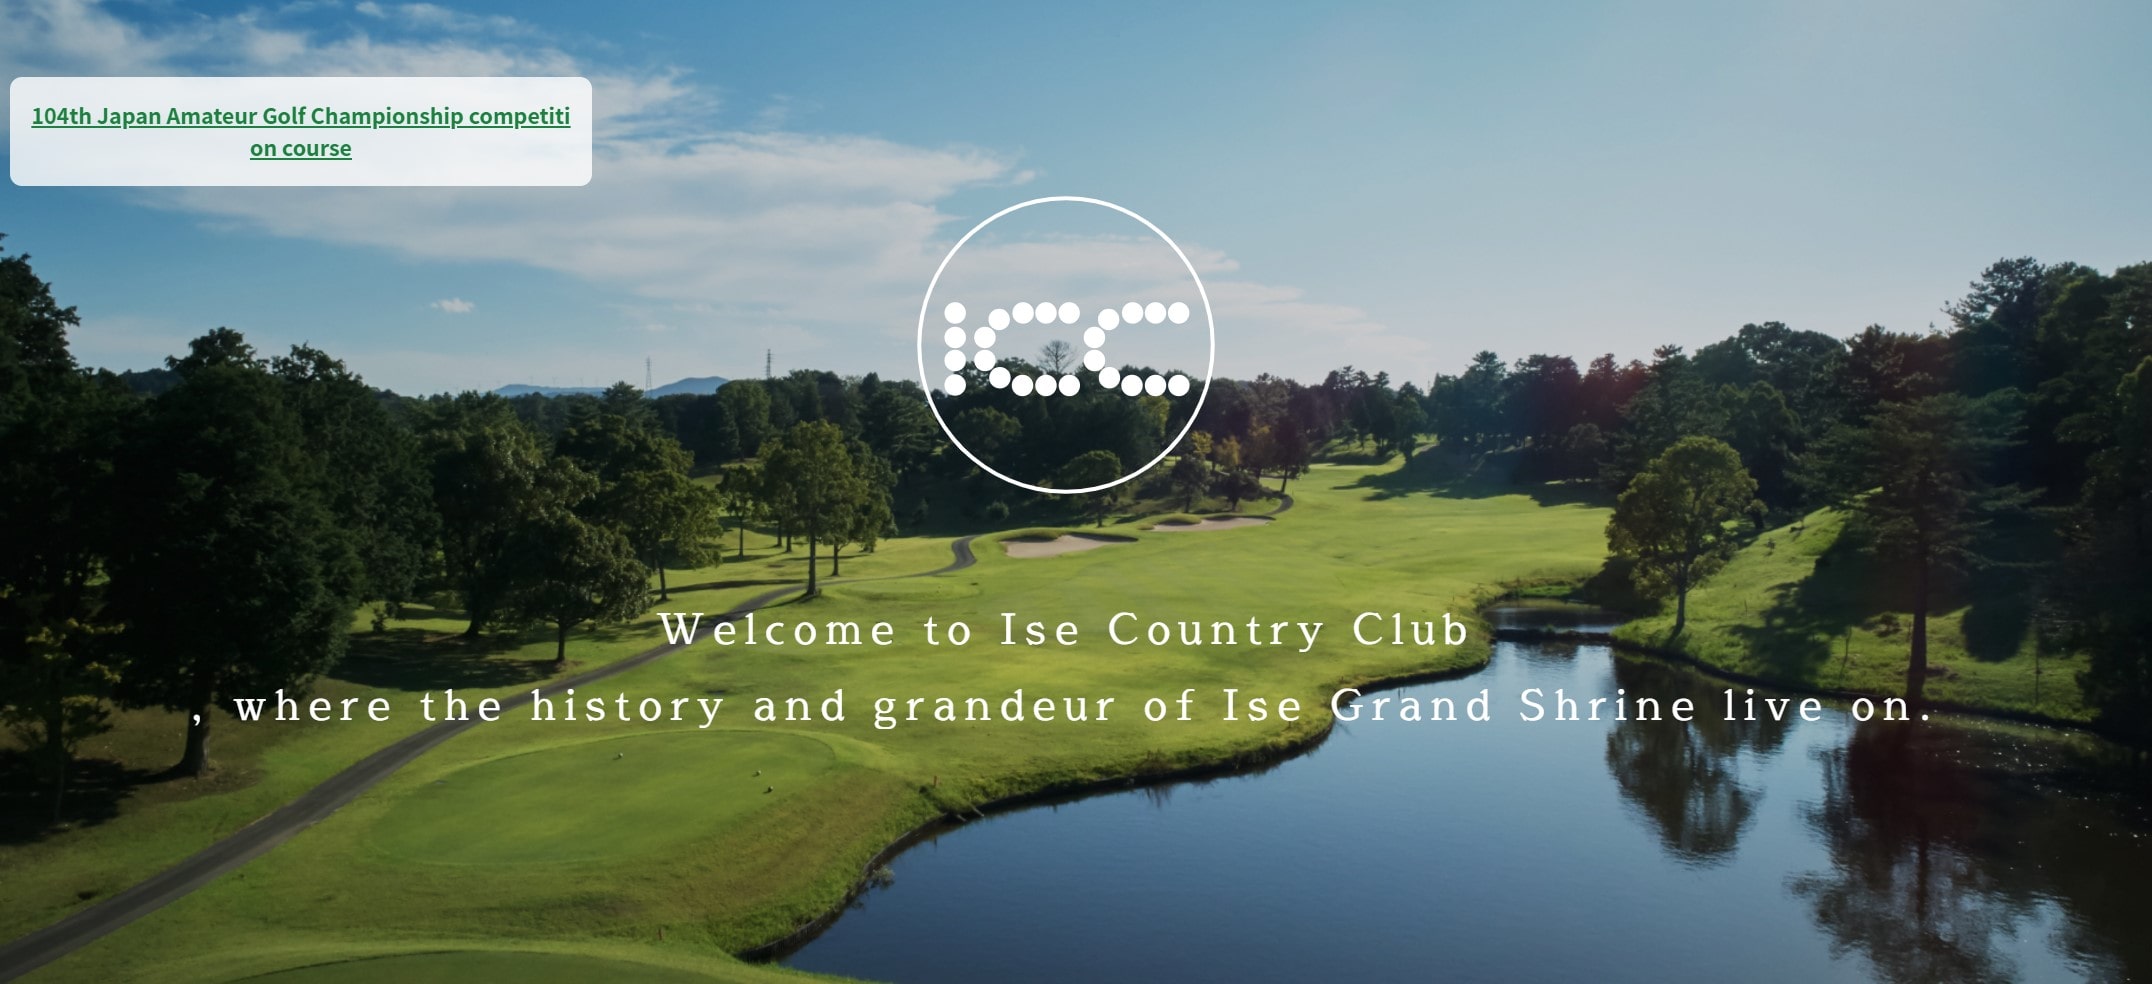 Ise Country Club